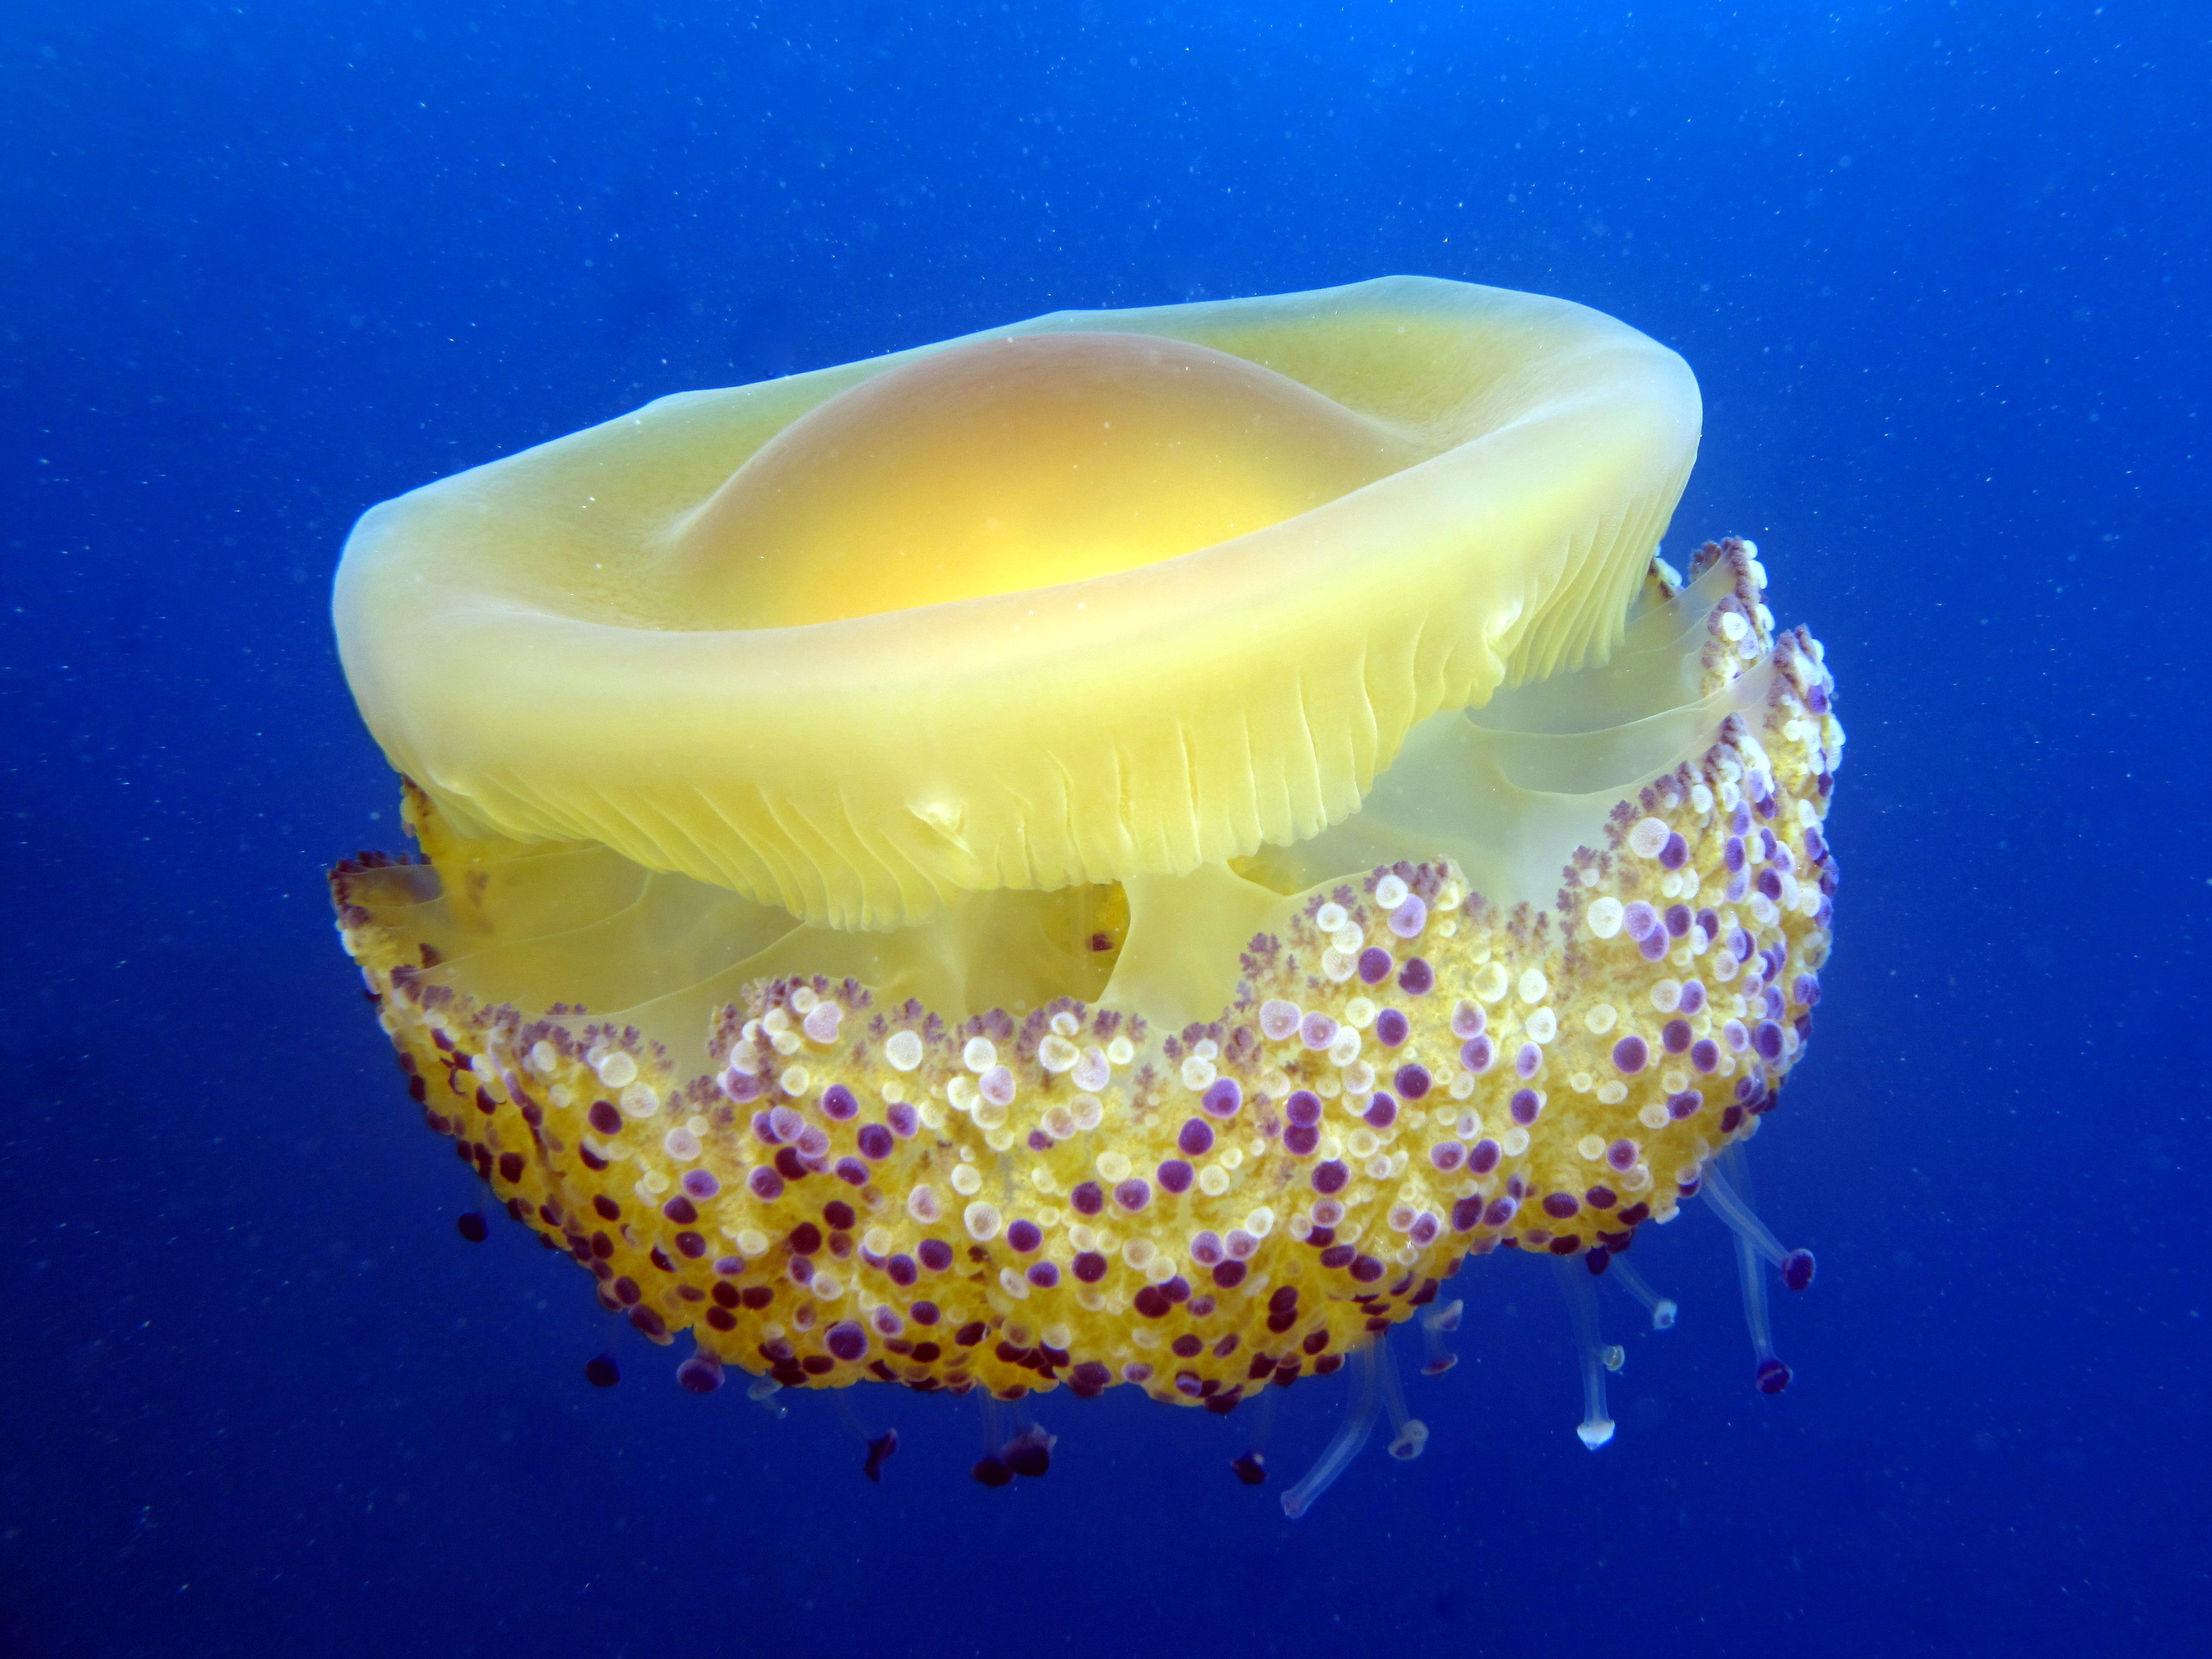 A close up shot of a fried egg jellyfish in the sea